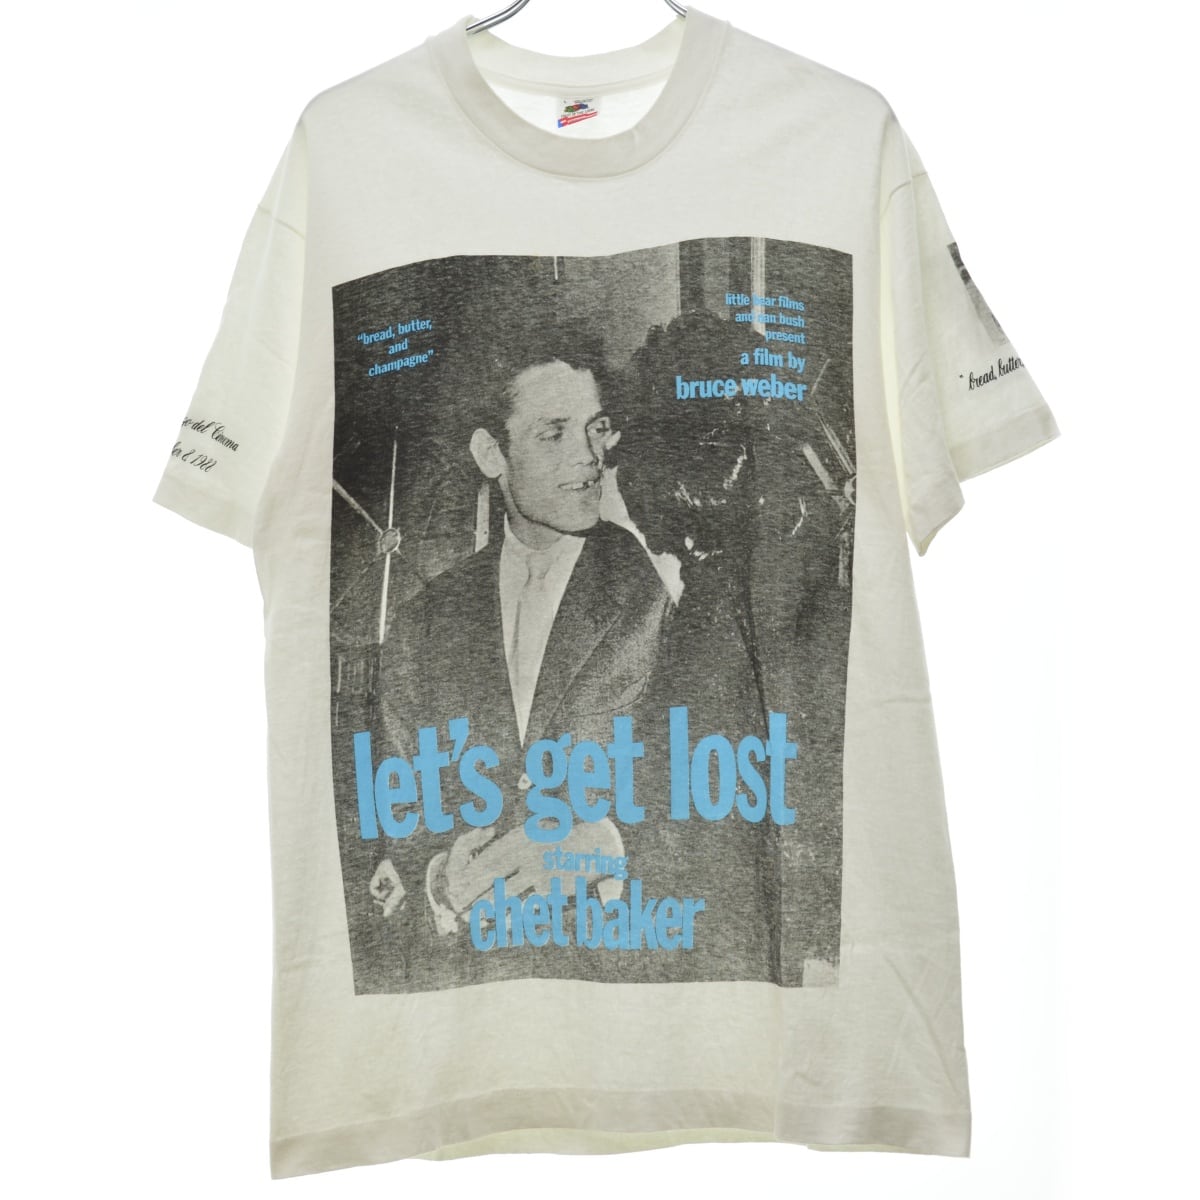 Bruce Weber / ブルース ウェーバー 80s FRUIT OF THE LOOM ボディ Let's get lost chest  baker 半袖Tシャツ vintage ビンテージ ヴィンテージ | カンフル京都裏寺店 powered by BASE